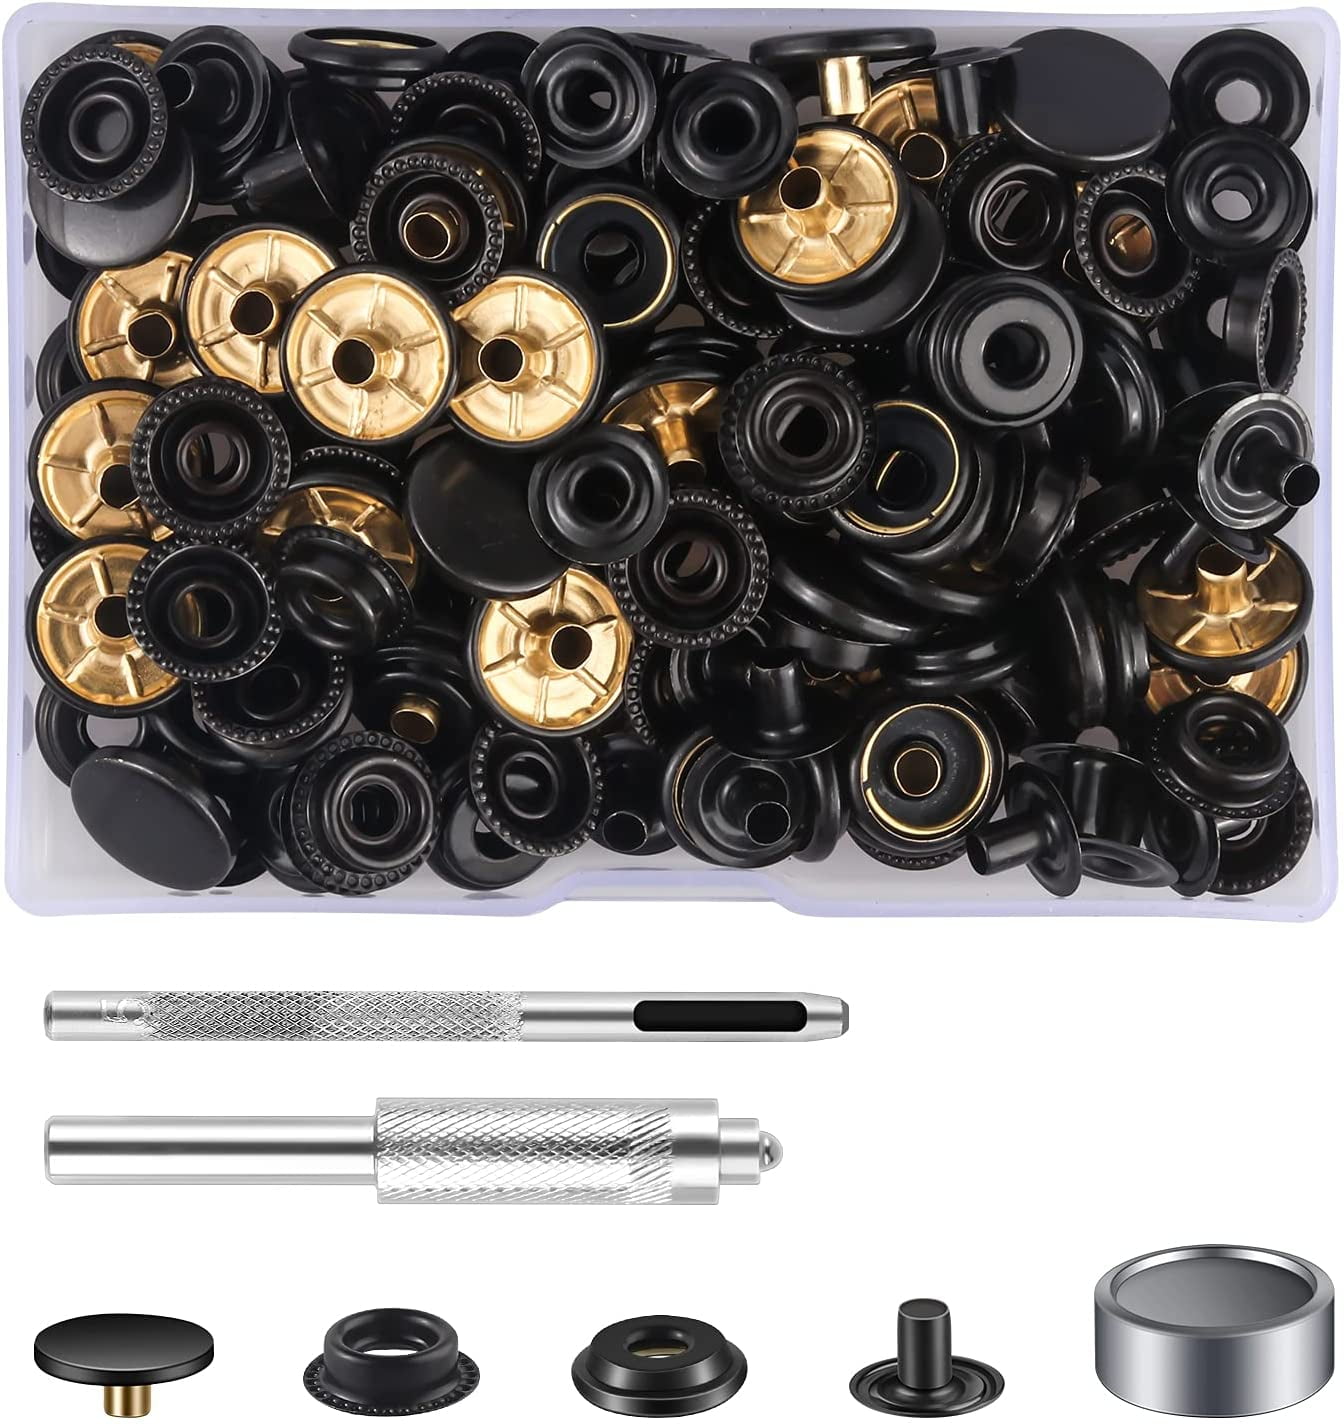 120 Sets Leather Snap Fasteners Kit, Lynda 6 Colors Metal Button Snaps Press Studs with 4 Installation Tools,Used in Leather Craft, DIY Craft, Overall